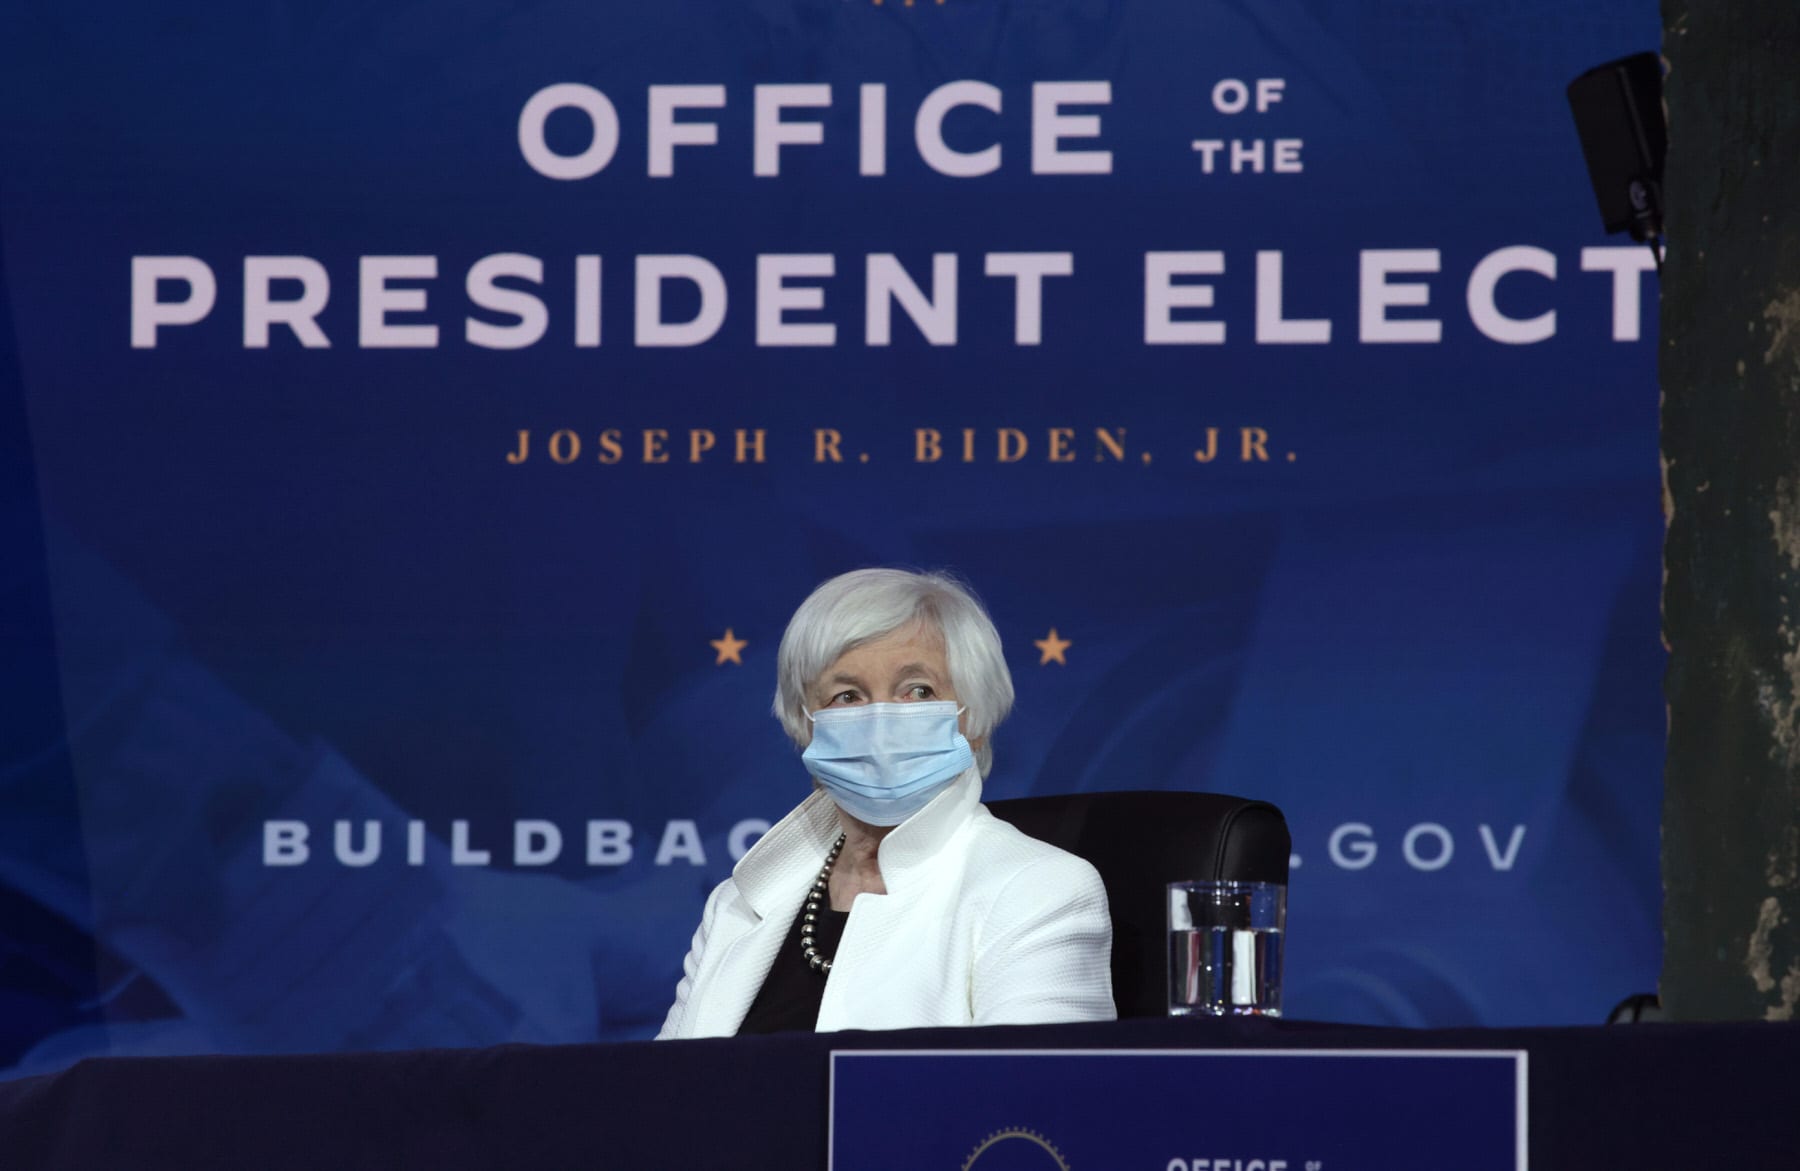 Janet Yellen looks on during an event to name President-elect Joe Biden’s economic team.